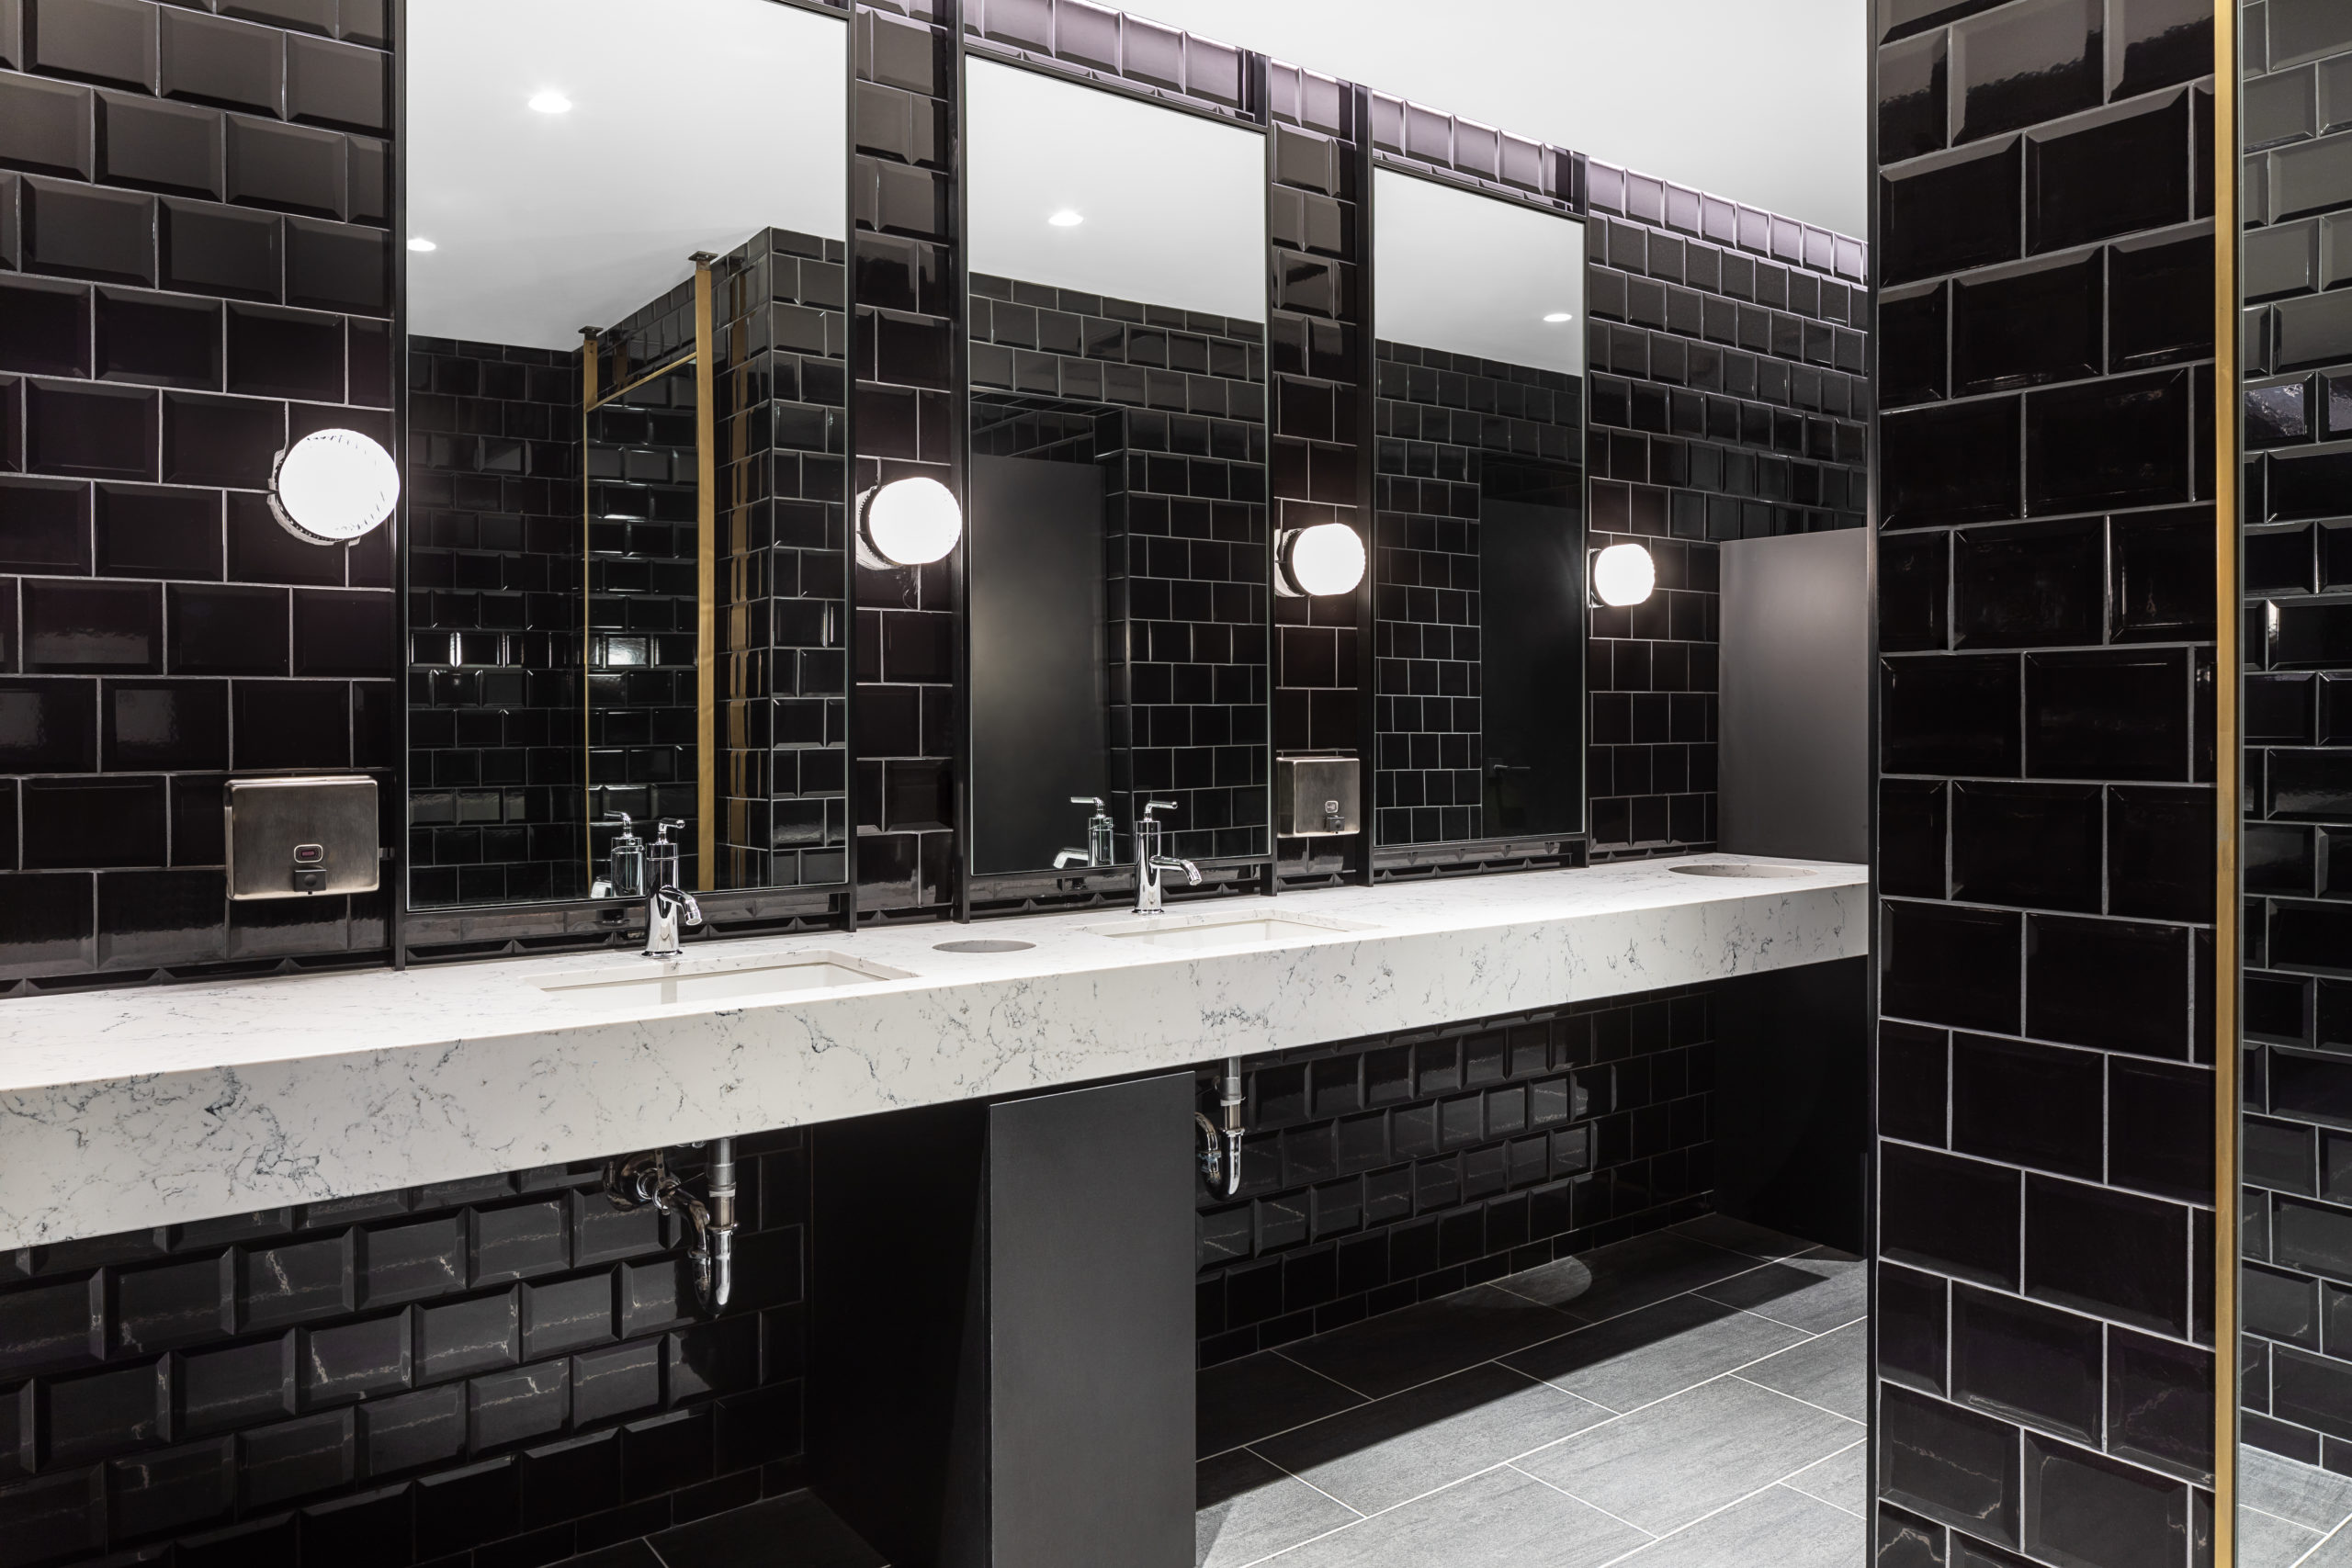 Gym bathroom classy interior, Fitness & Gym Design, Rumble Boxing Studio in Vancouver  BC, by Cutler